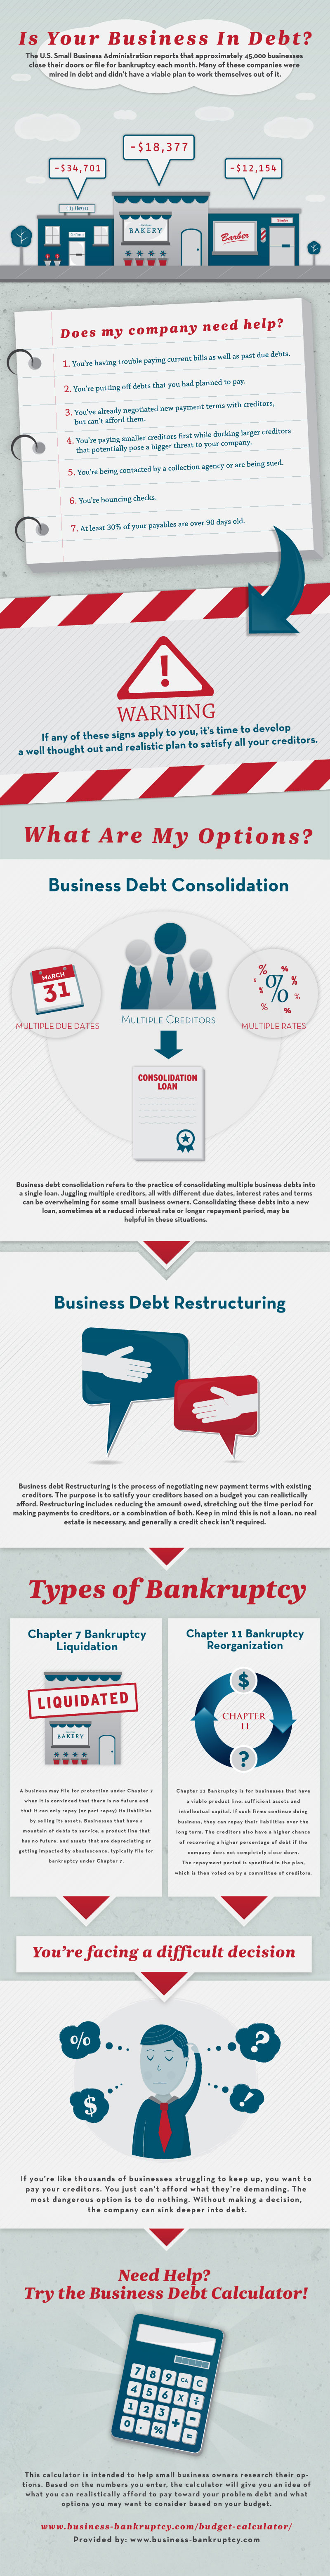 Is Your Business In Debt?